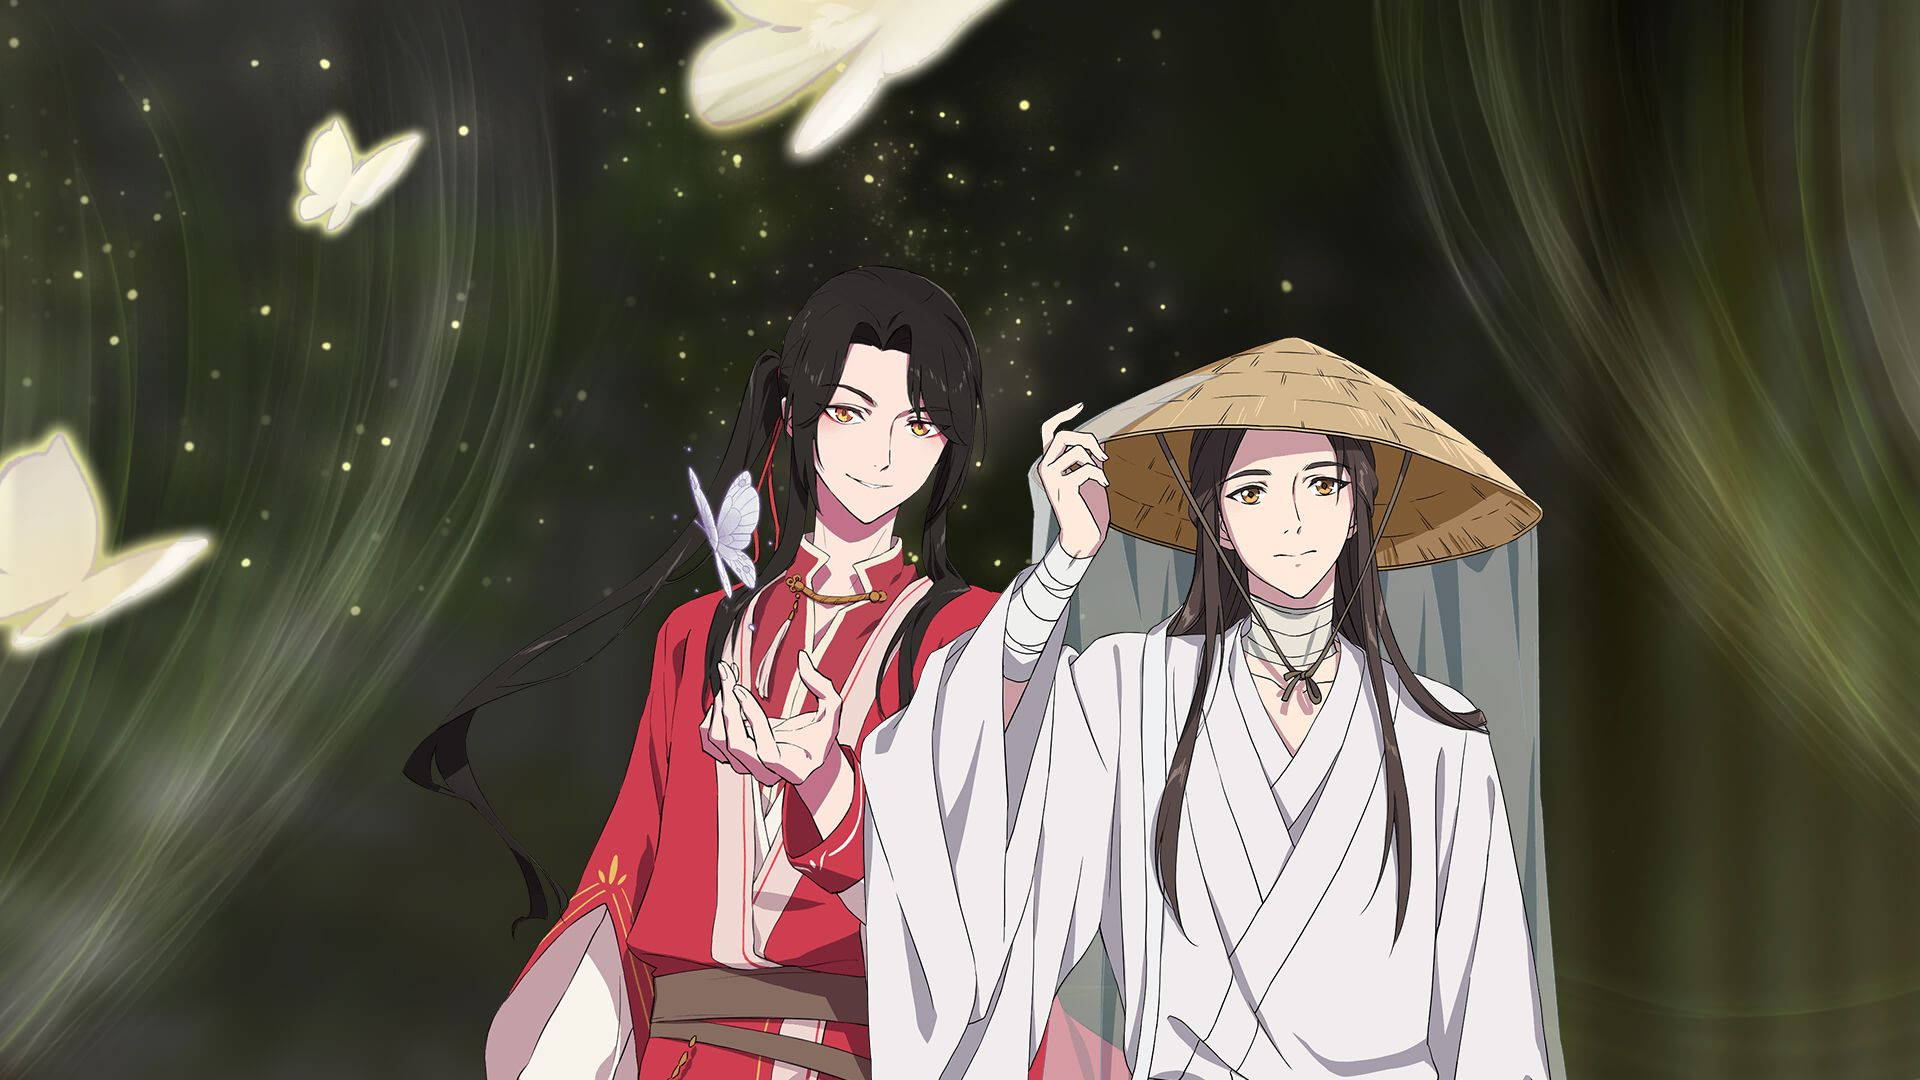 Hua Cheng And Xie With Butterflies Background